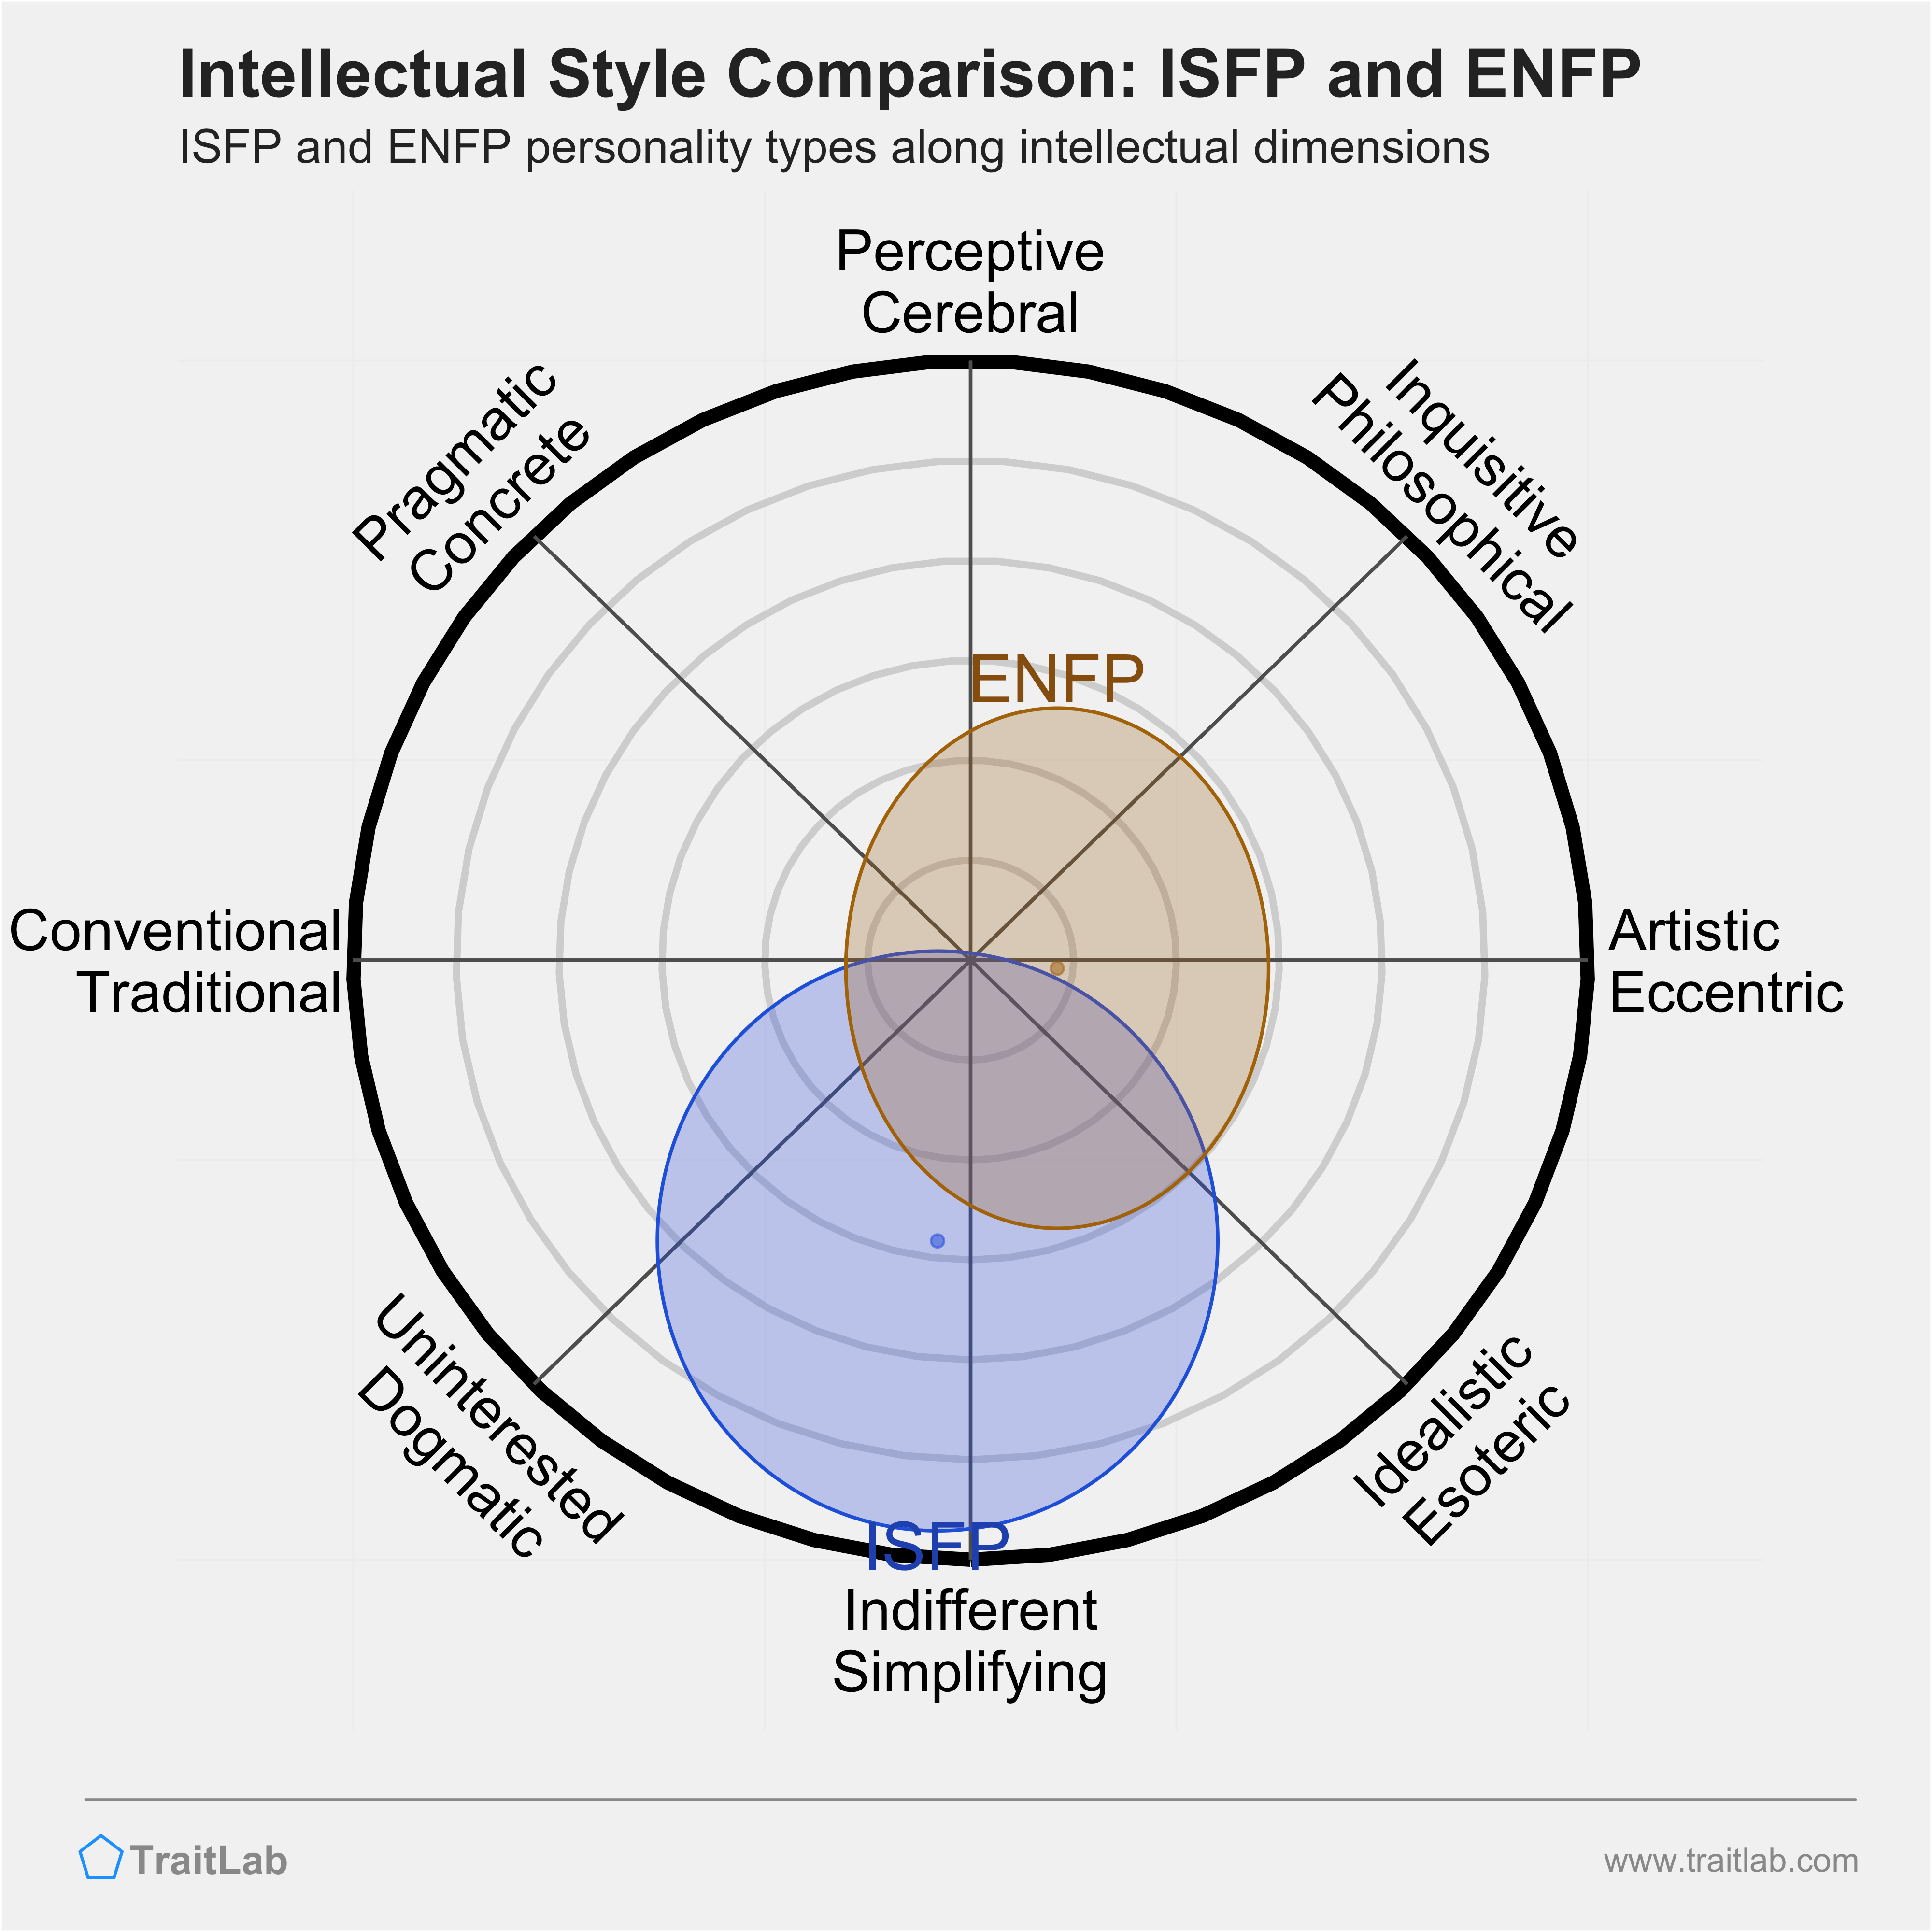 ISFP and ENFP comparison across intellectual dimensions